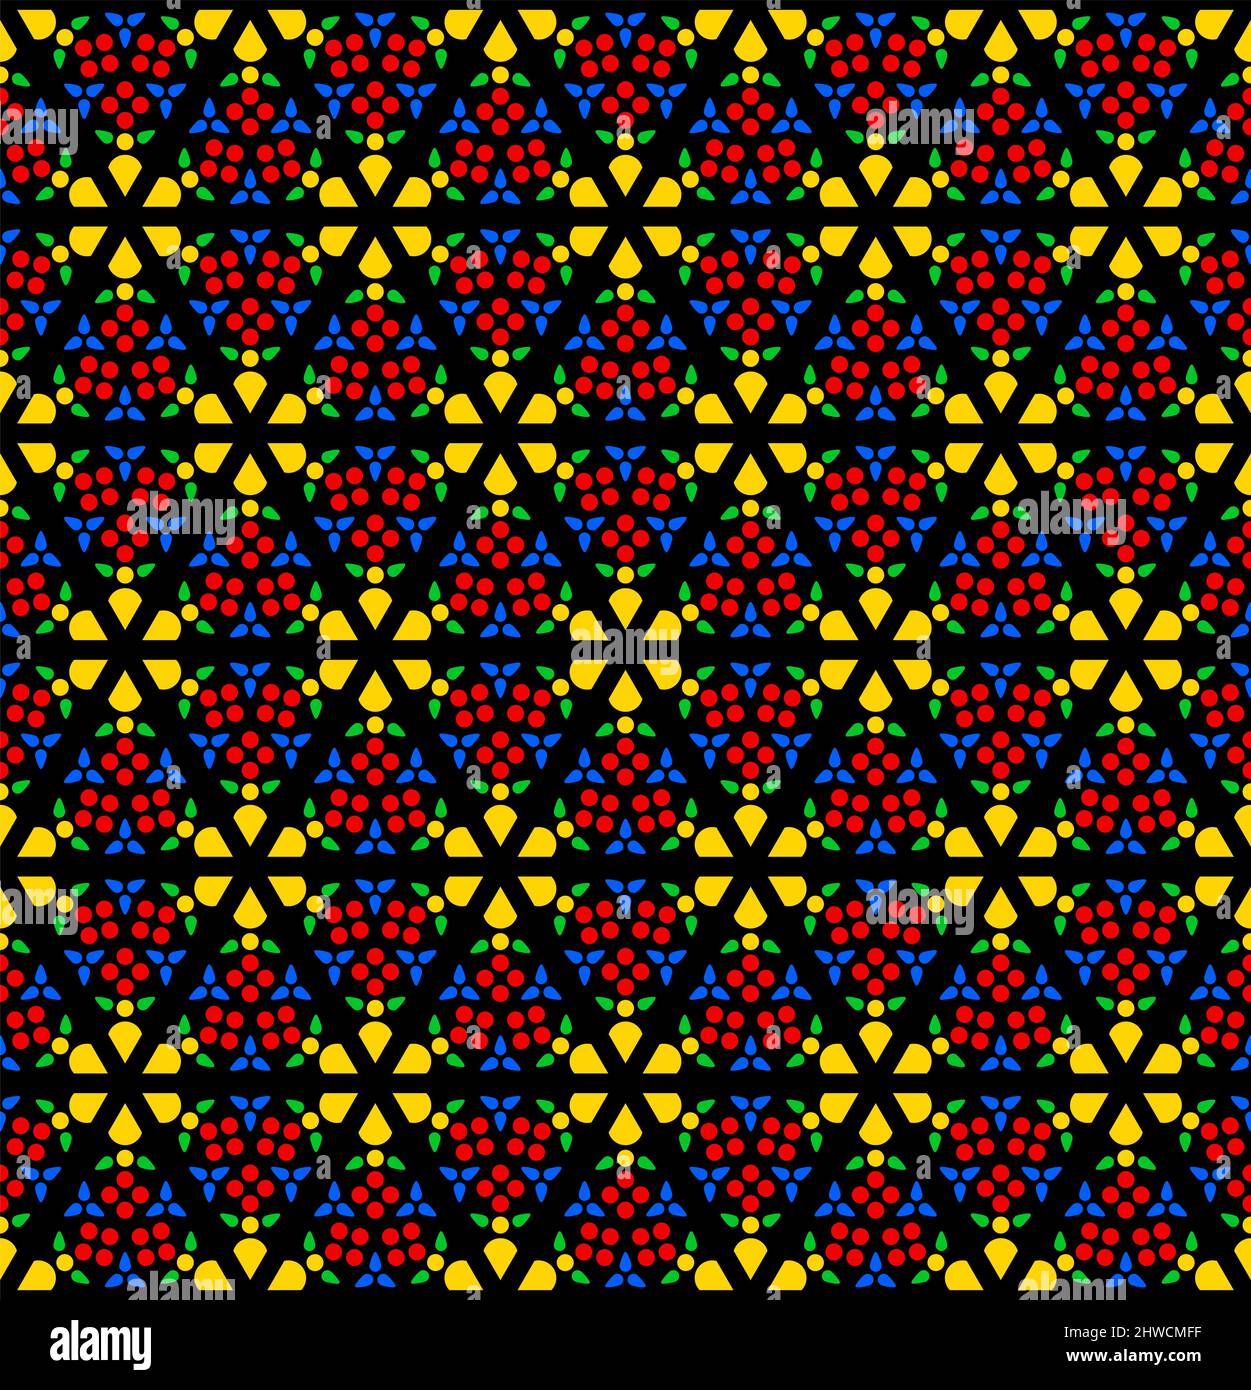 Rose window, stained glass design, tile with seamless, endless pattern. Hexagonal arranged triangles with textured effect, and with colorful patterns. Stock Photo